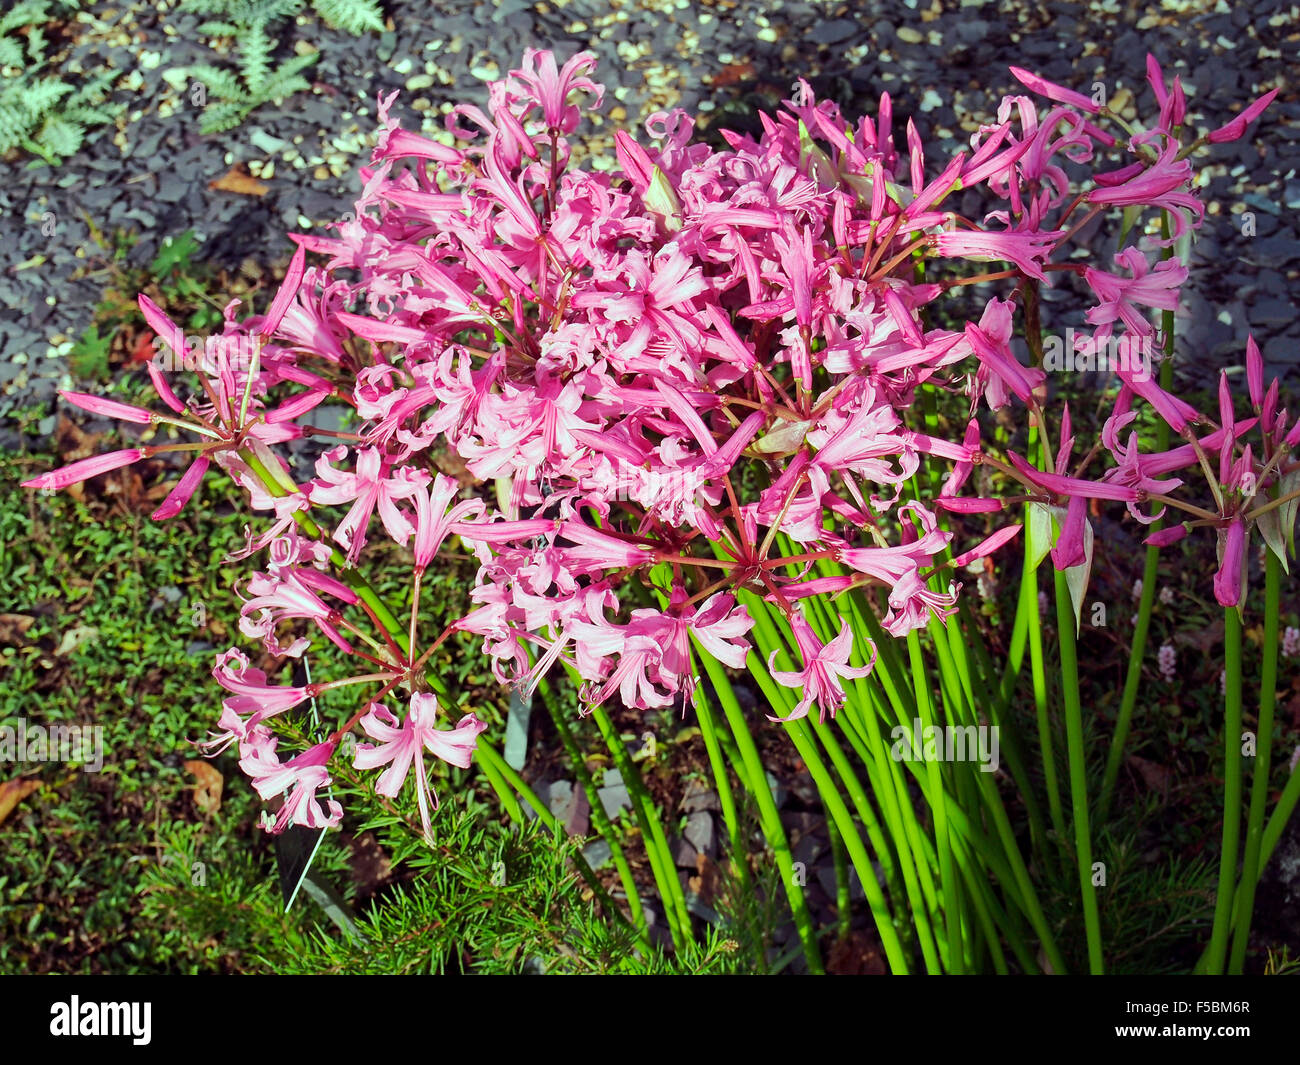 A clump of Nerine Bowdenii, also known as  Cornish lily, Cape flower and Guernsey lily provides autumn colour in a garden. Stock Photo